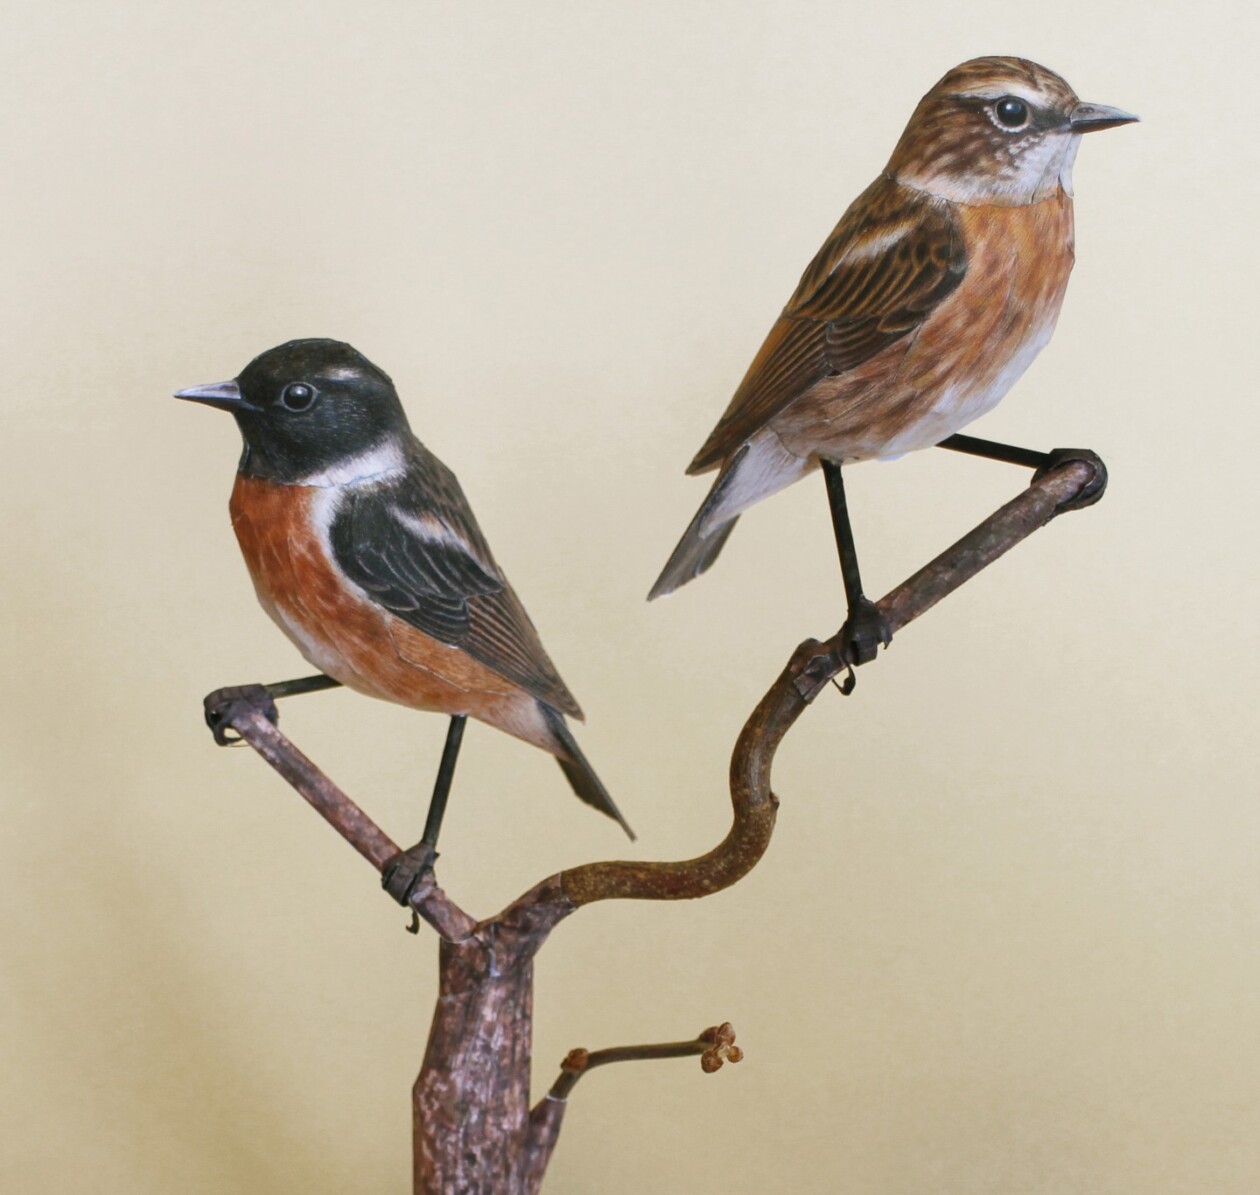 Hyper Realistic Bird Sculptures Made From Paper And Watercolor Paint By Johan Scherft (10)